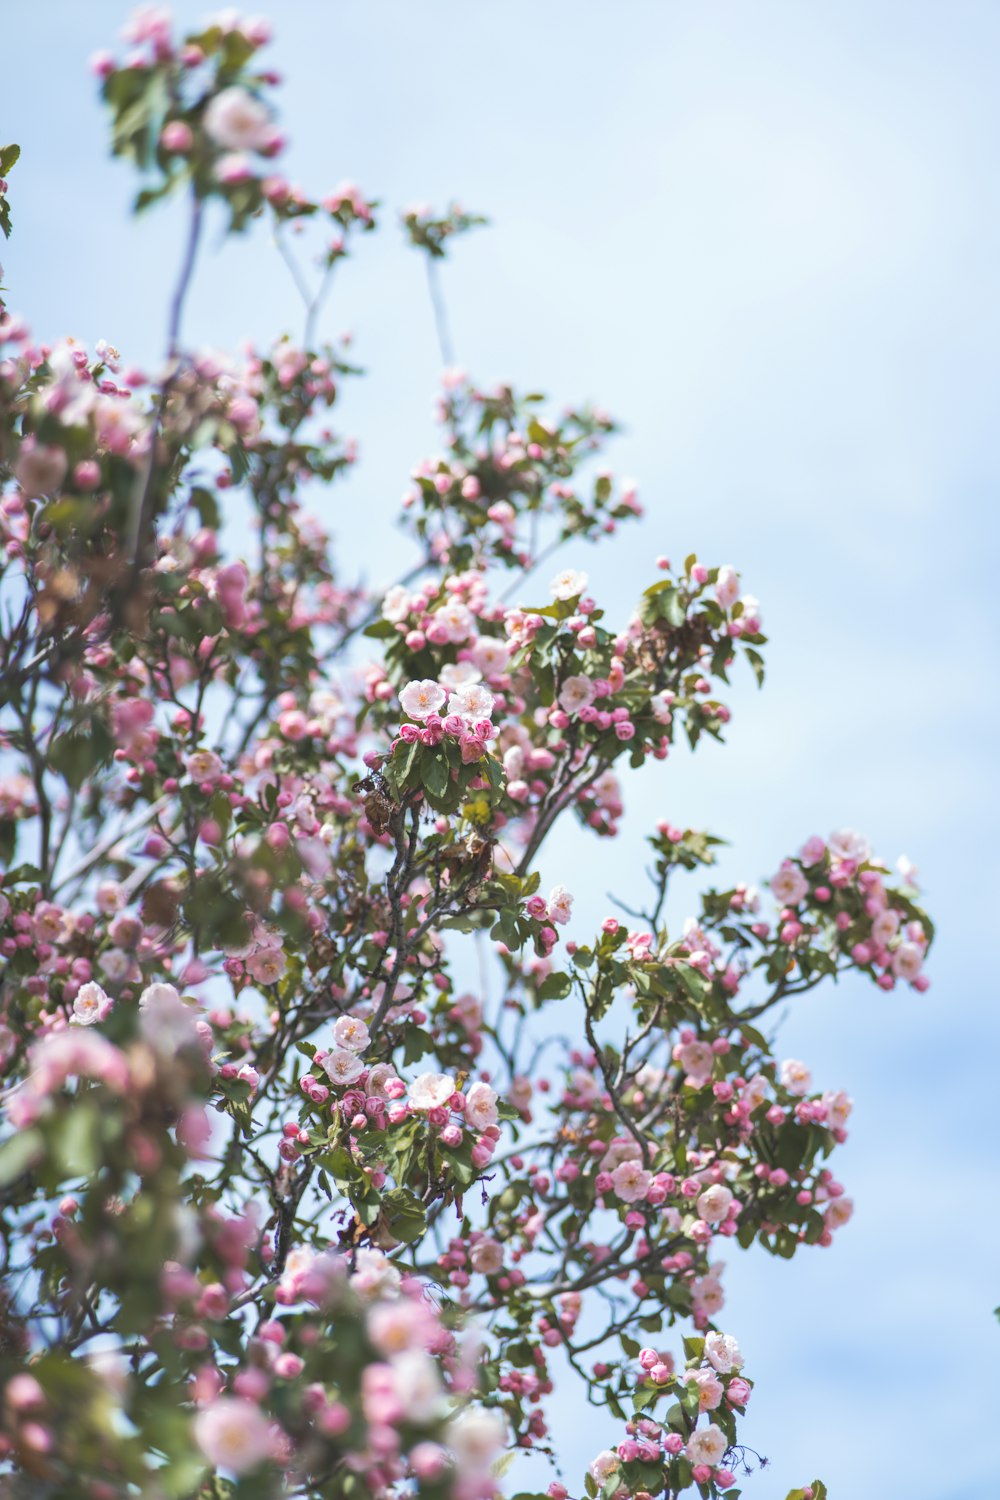 pink flowers with green leaves under blue sky and white clouds during daytime